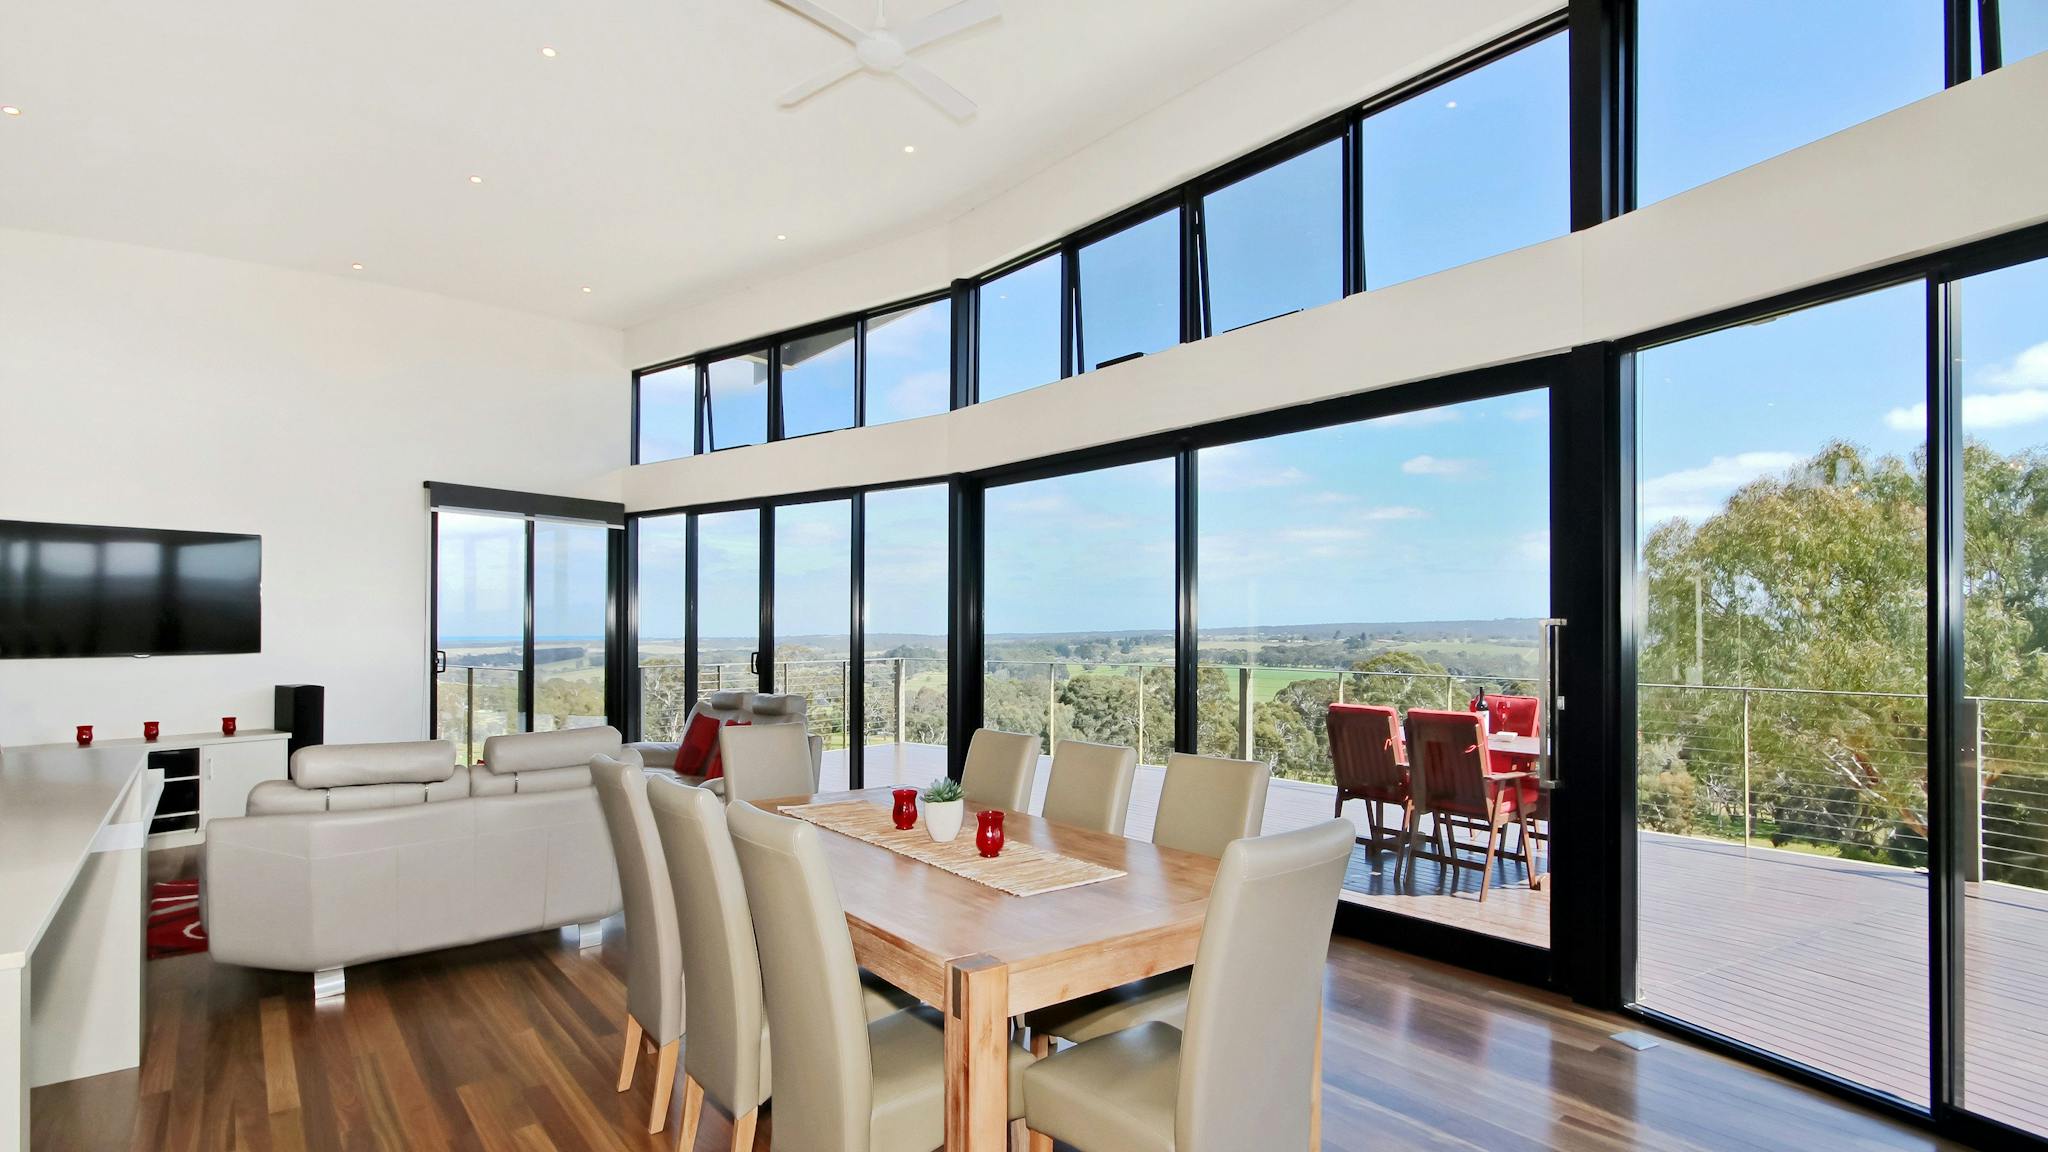 Dining and living area onto the deck and a spectacular view of the region.